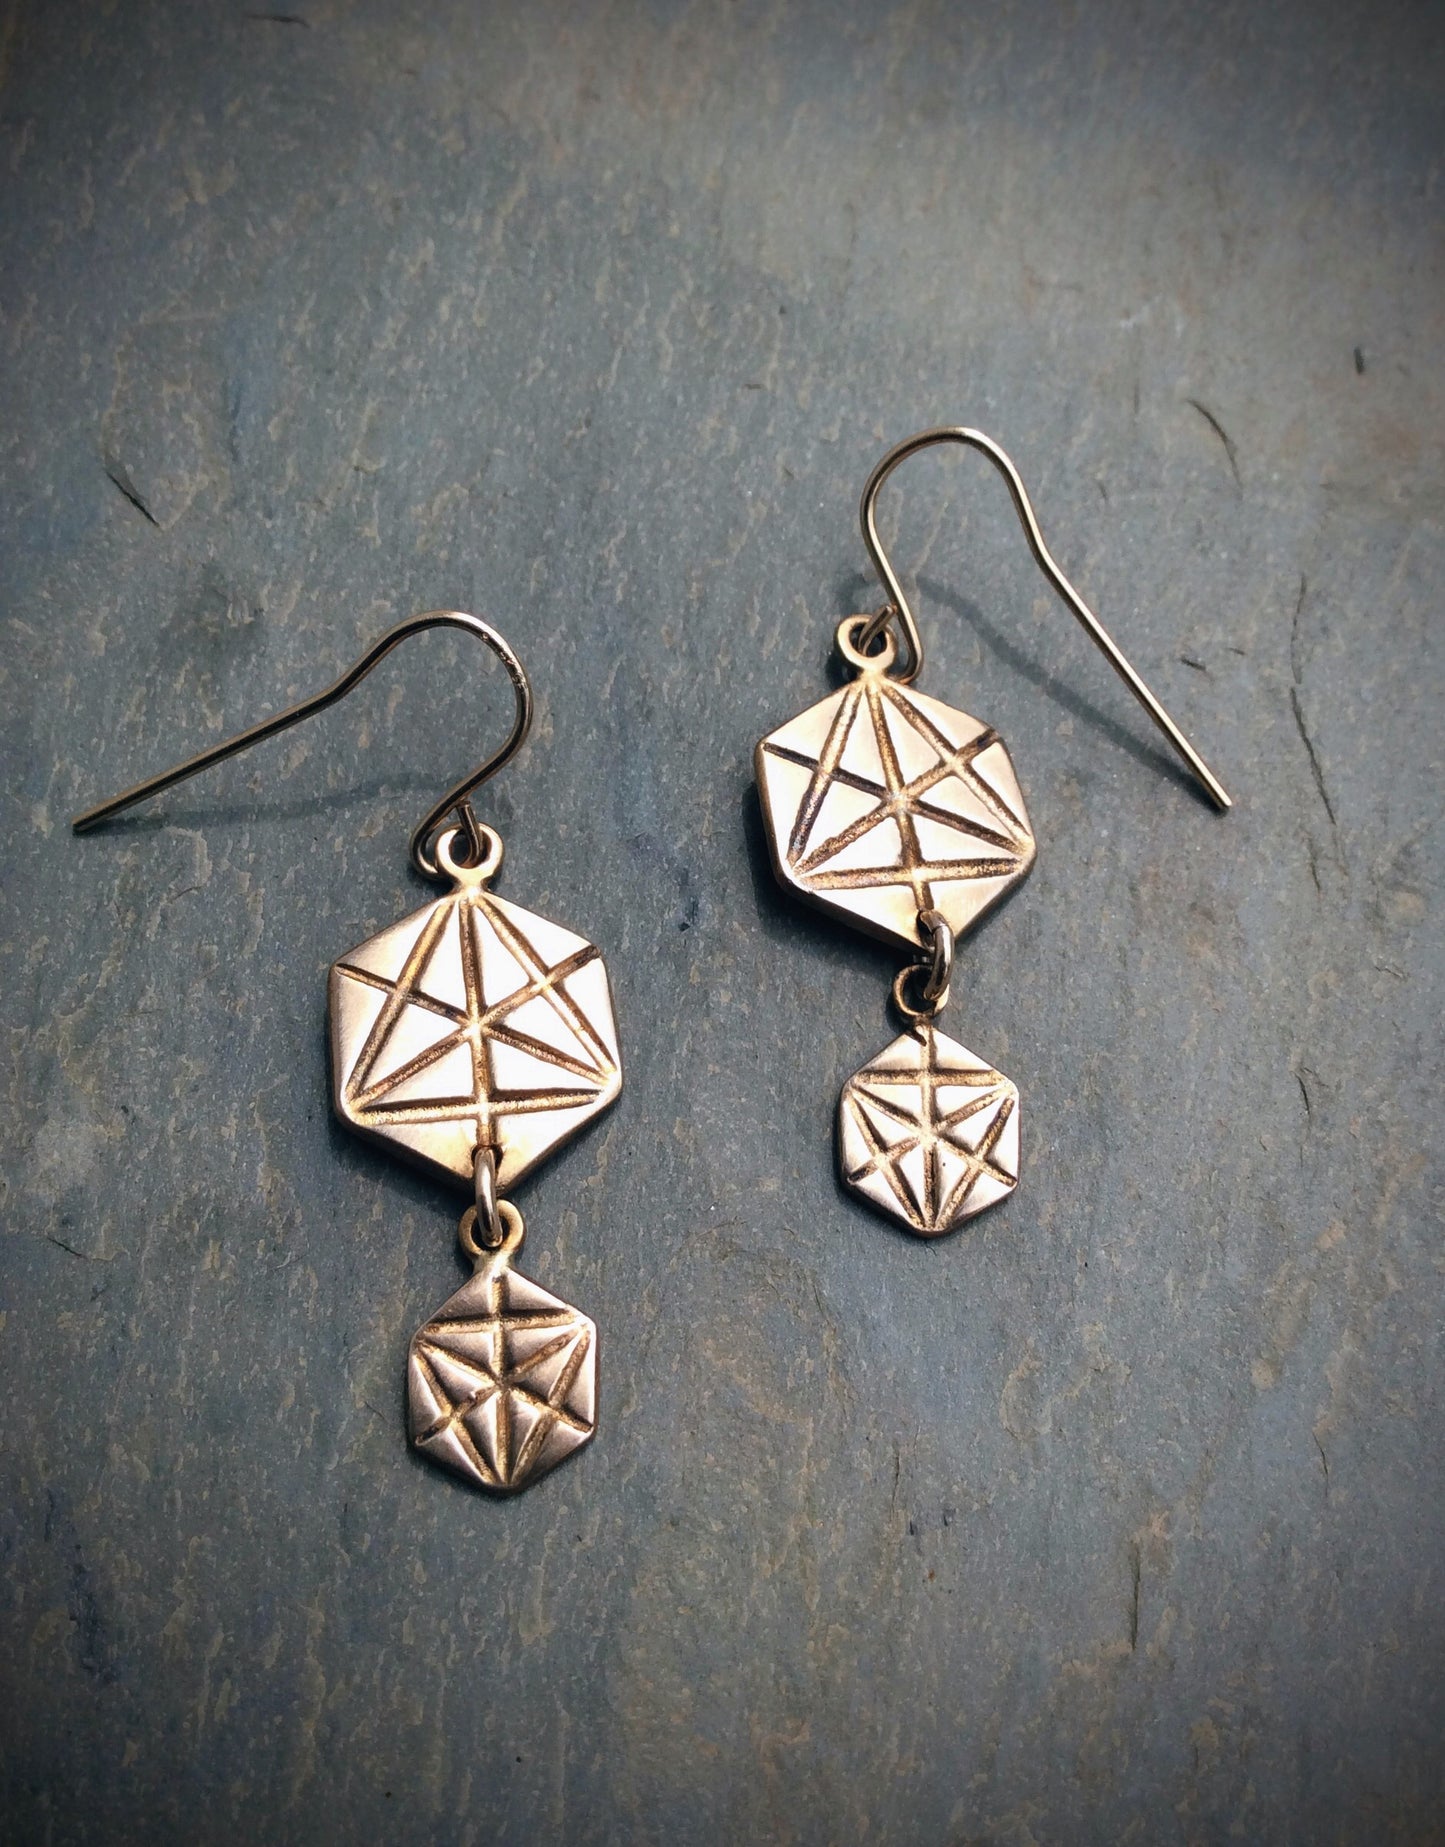 Double Merkaba Drop Earrings    Available in Sterling Silver or Bronze & 14K Gold Filled